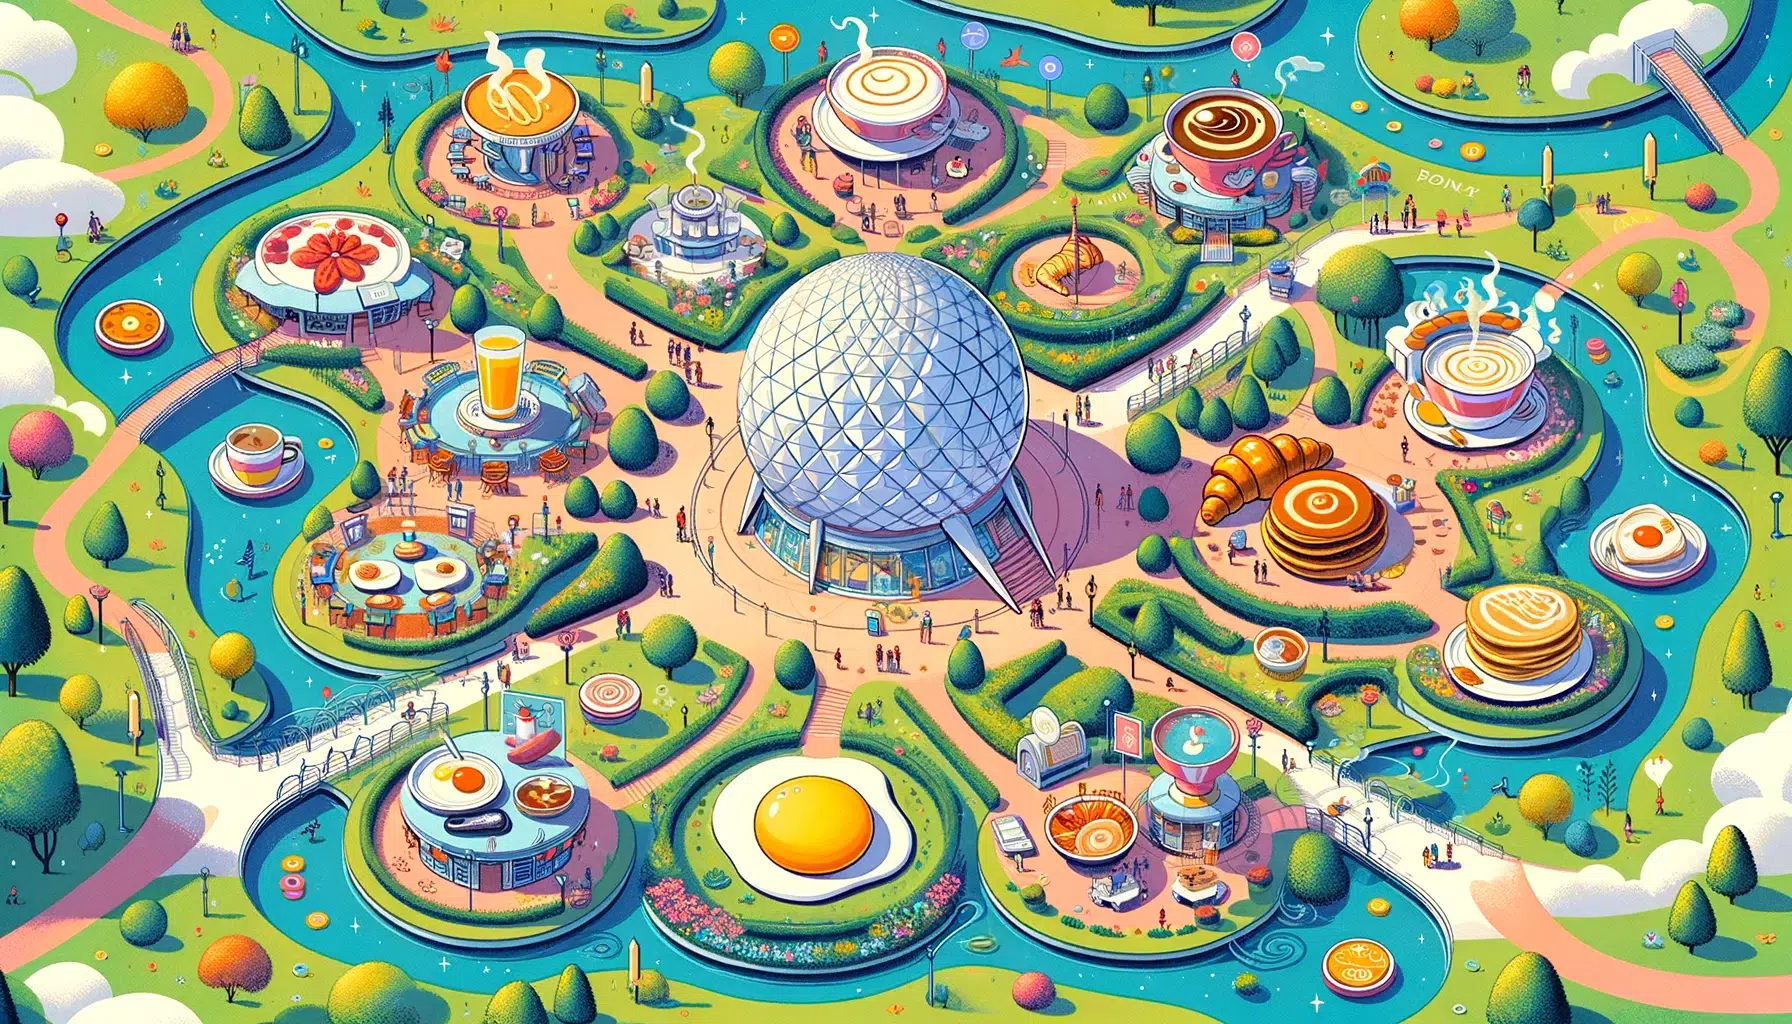 Map of epcot in cartoon form. There are cartoon breakfast items surrounding the famous spaceship earth.